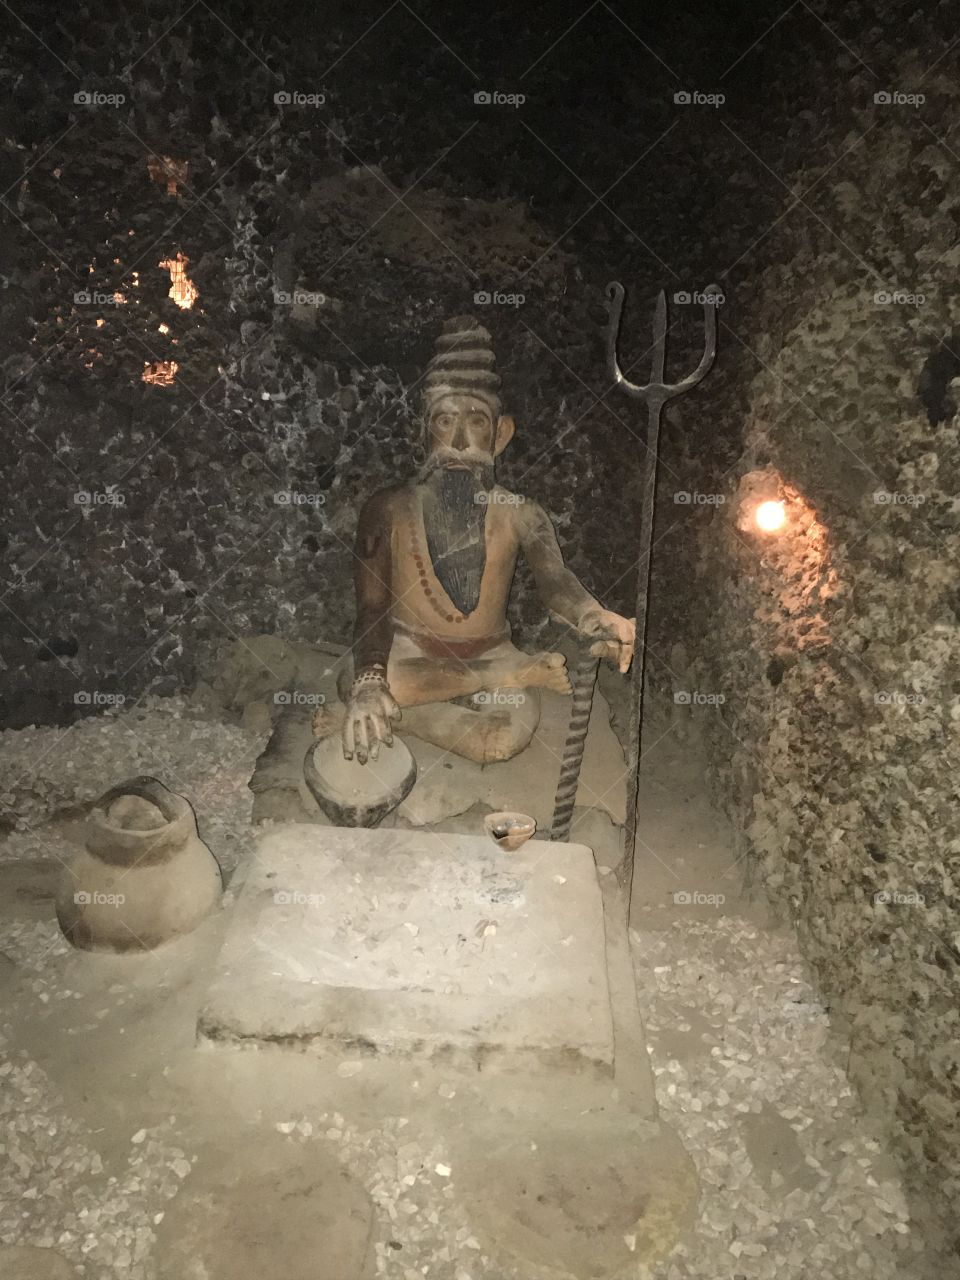 Baba statue